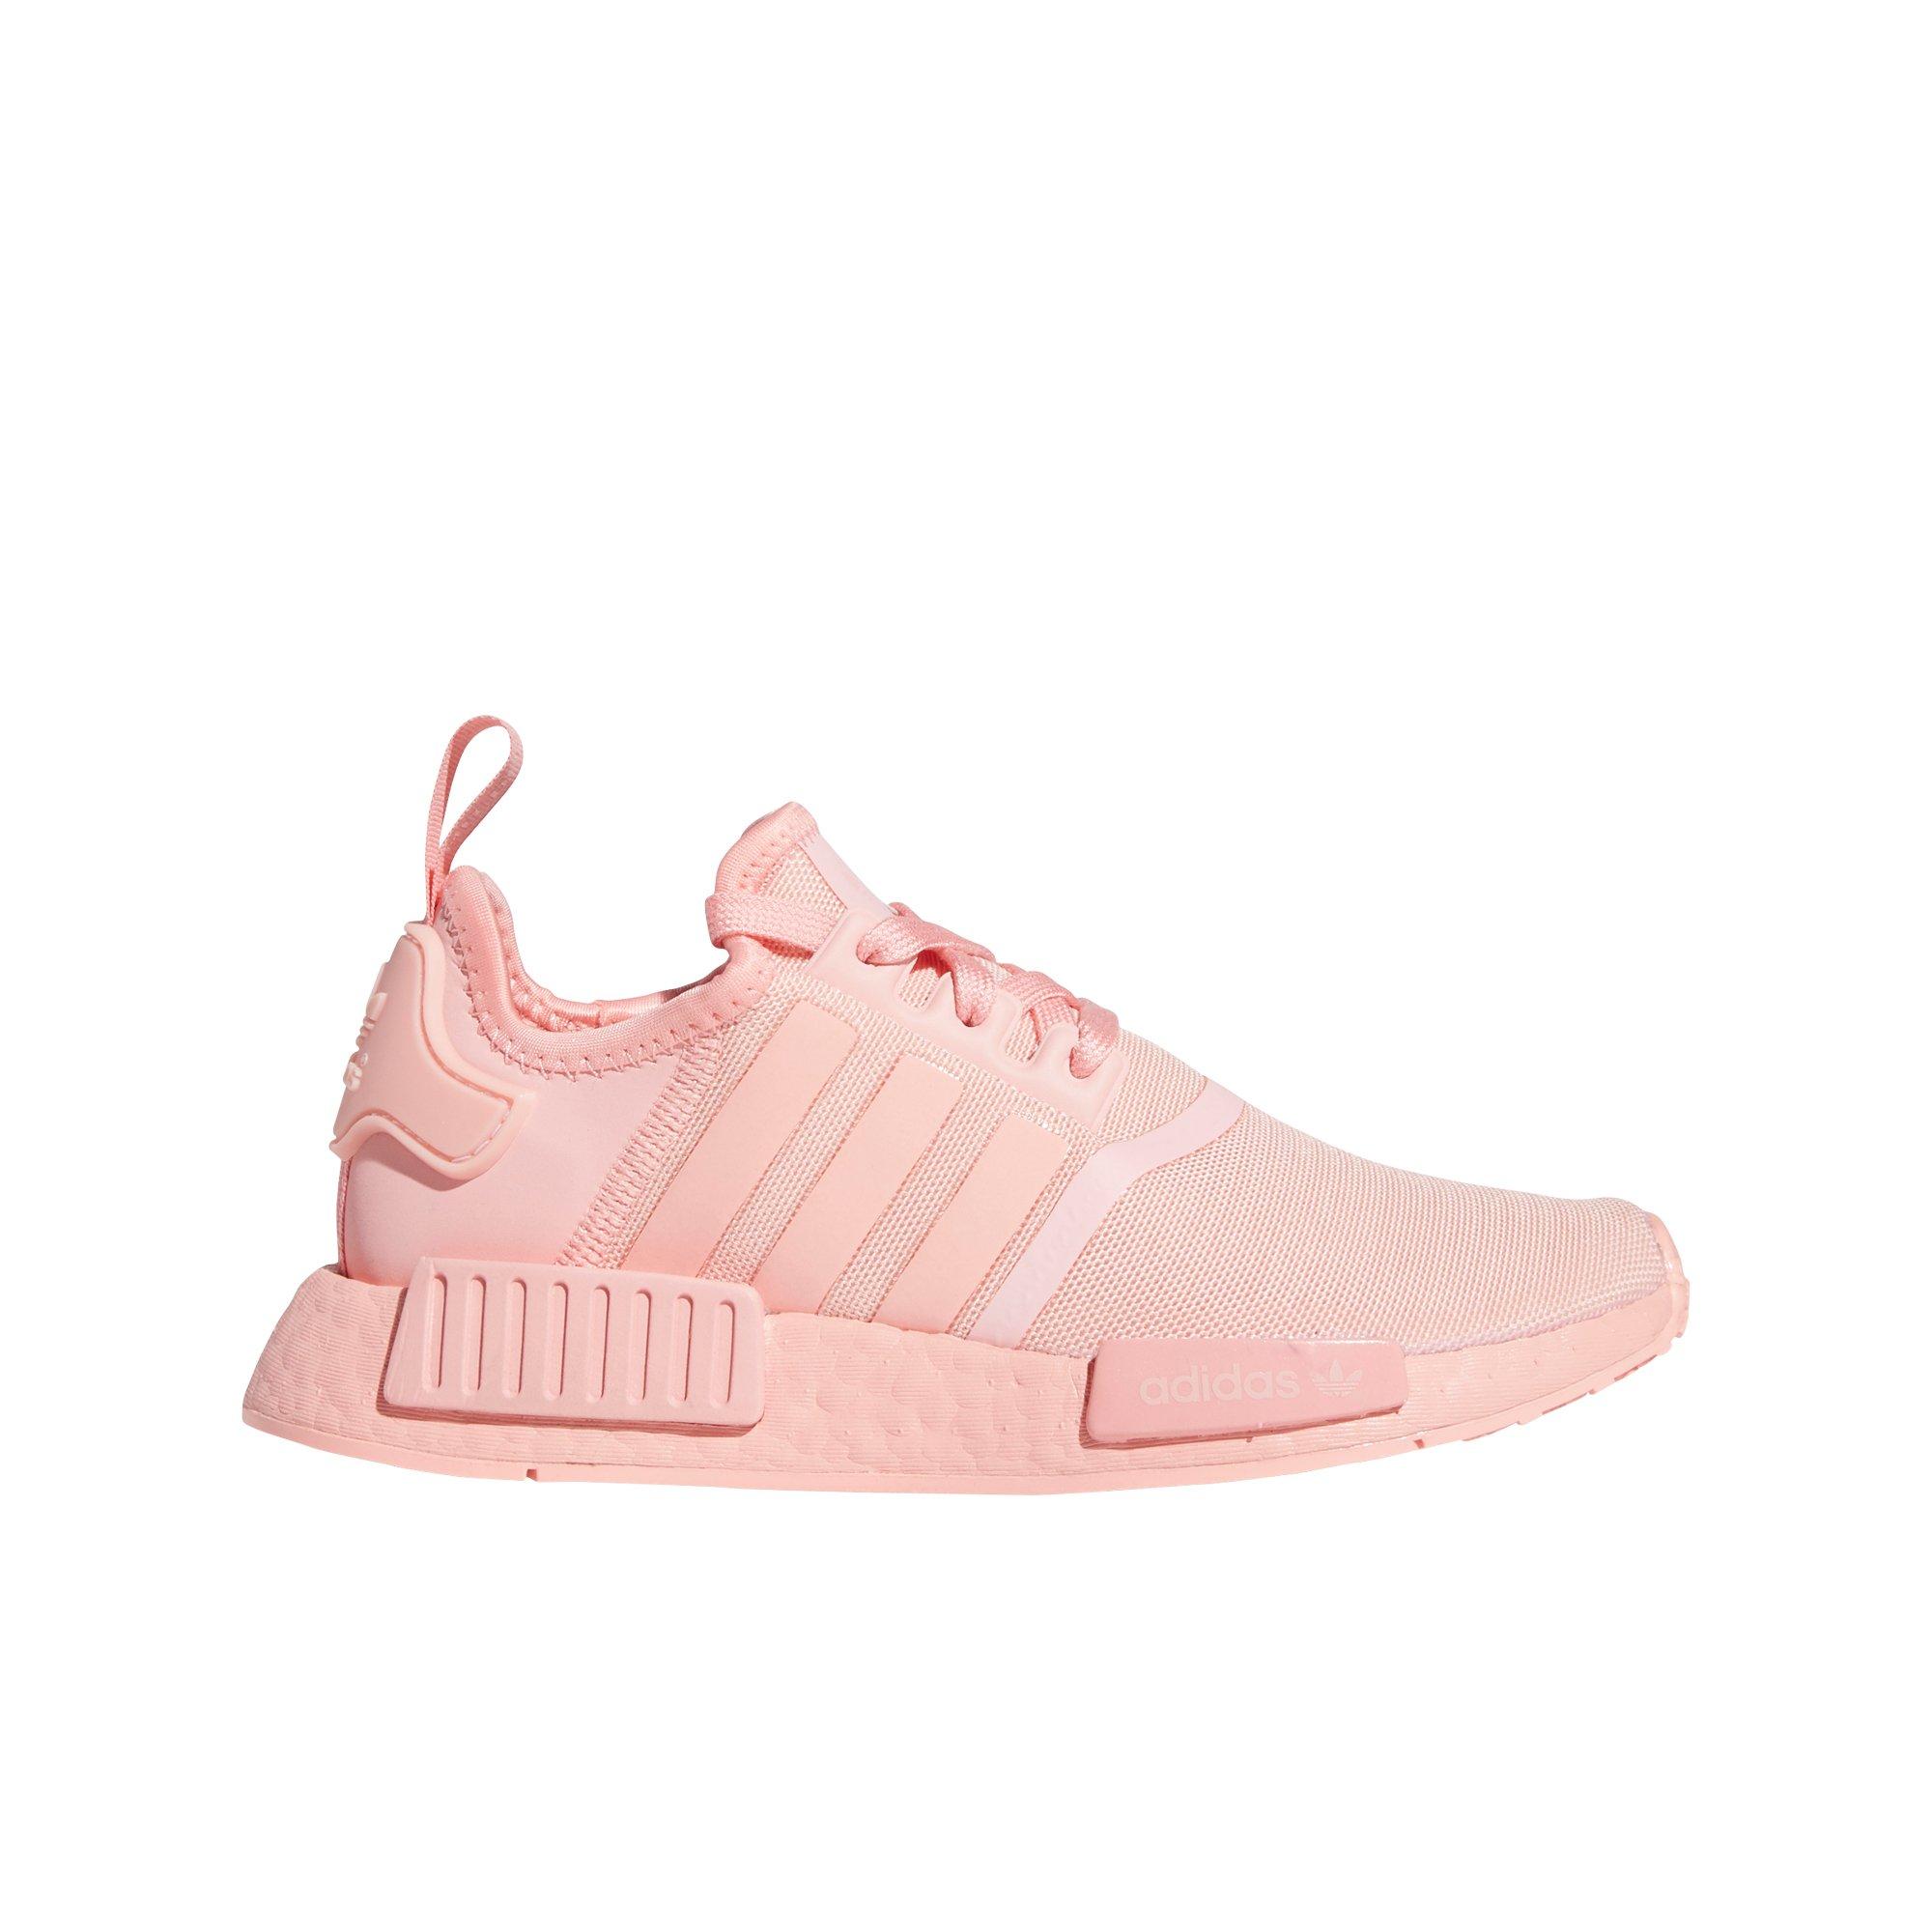 pale pink adidas shoes